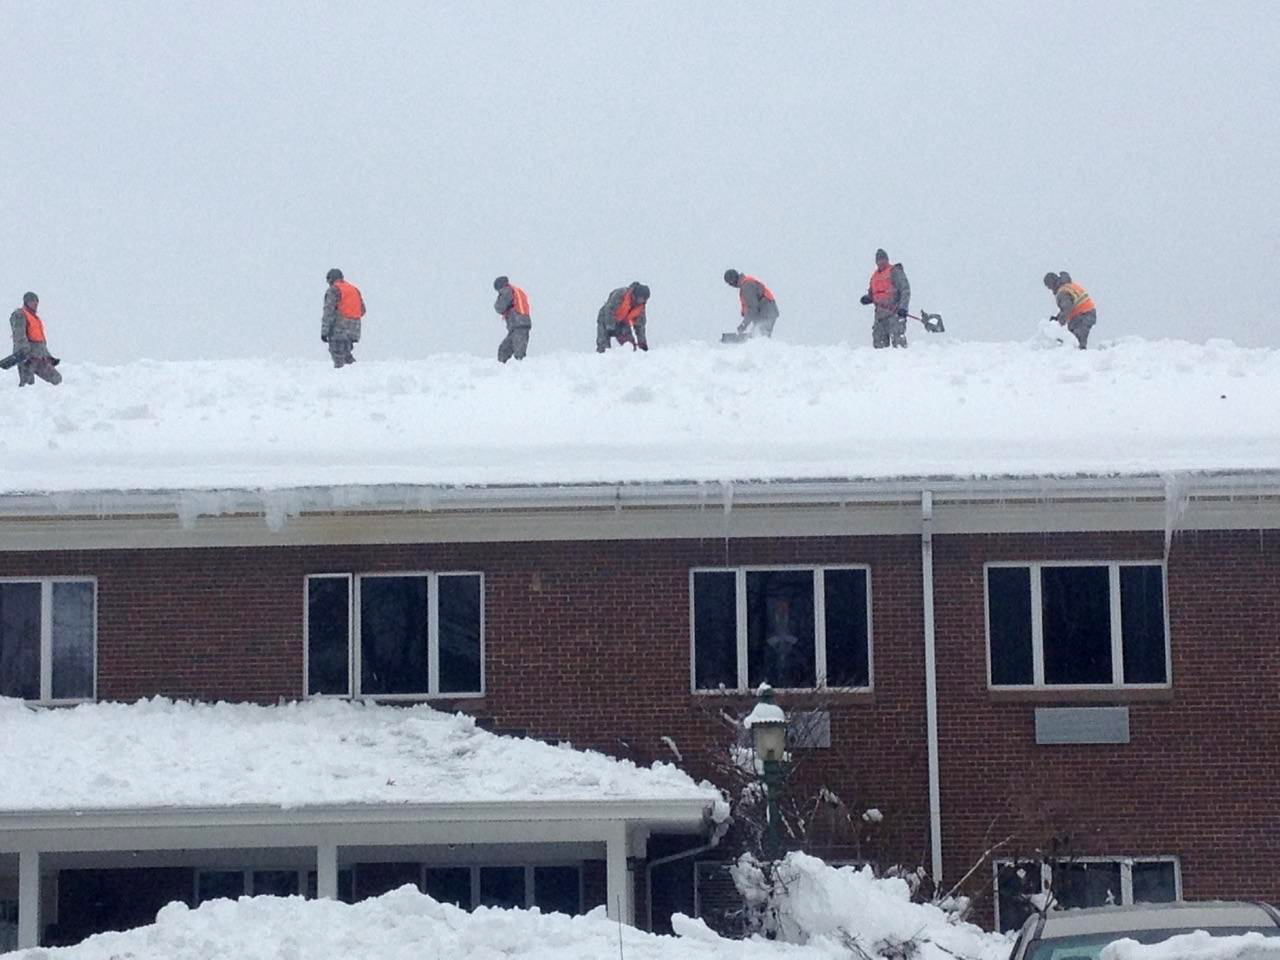 Photograph of National Guard members on the roof of a two-story brick building shoveling snow. The photo shows seven guard members in fatigues and orange vests standing on the roof, about five of whom clearly have snow shovels. 